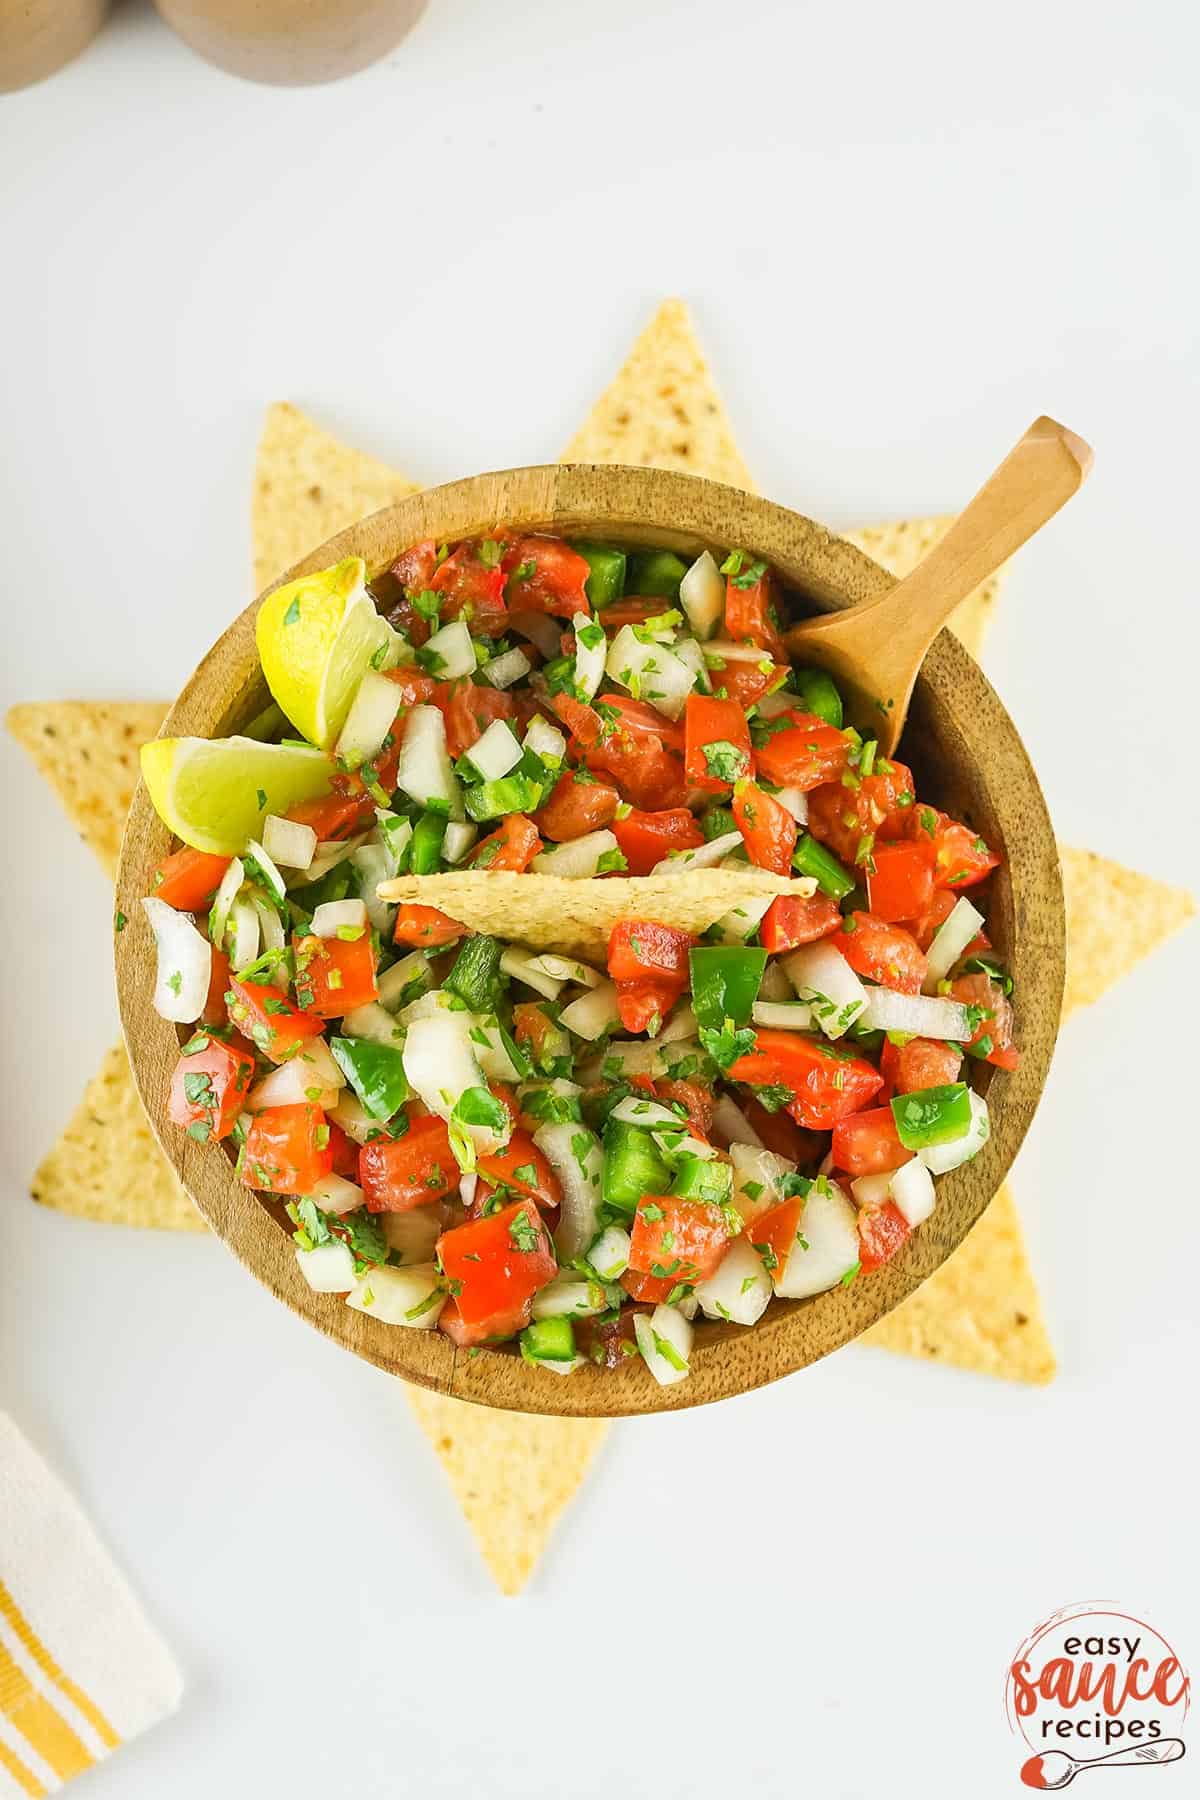 pico de gallo in a brown bowl with tortilla chips surrounding the bowl